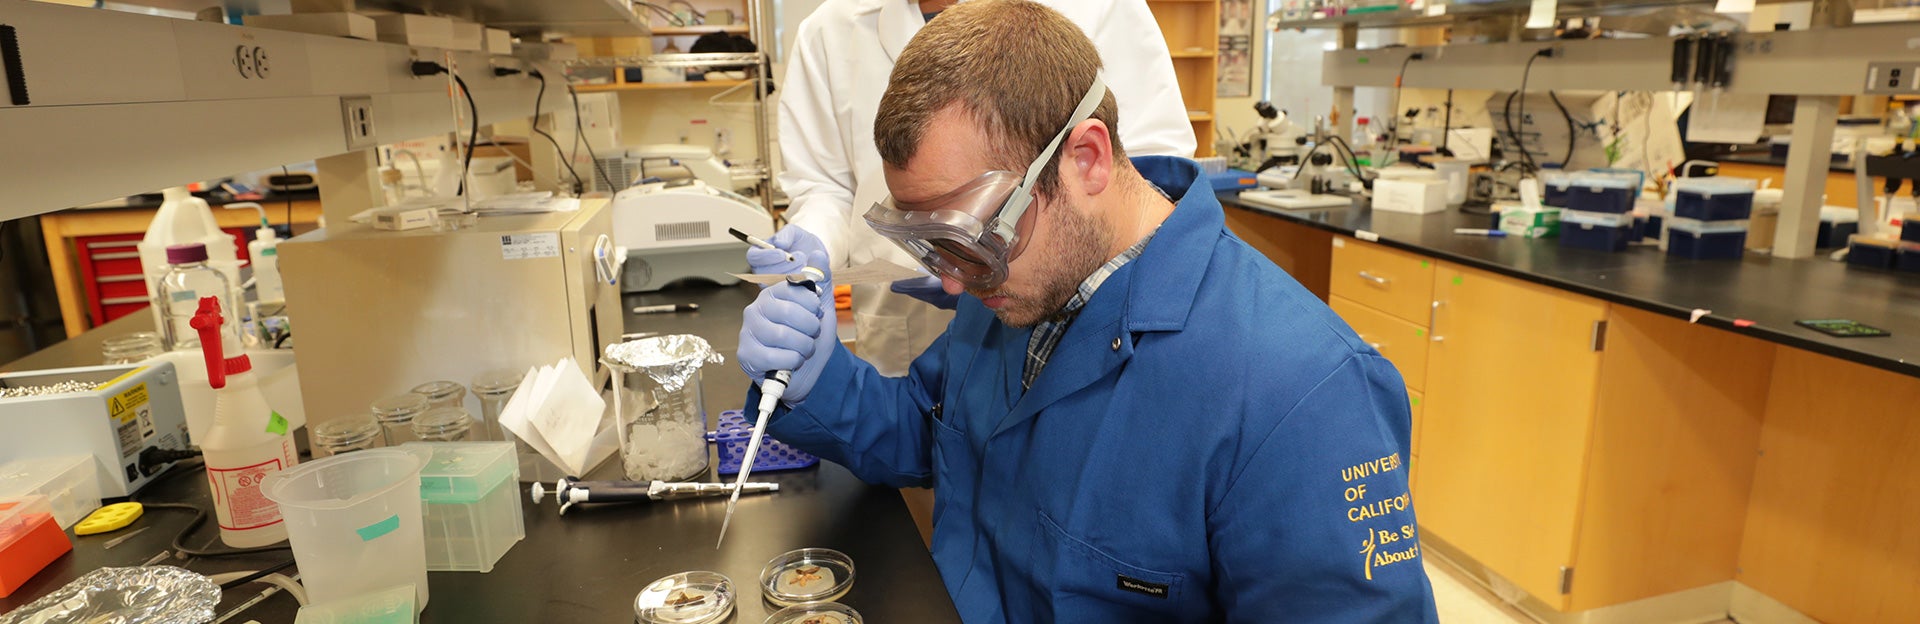 Jake looking at maggots with Undergraduate Student (c) UCR / CNAS